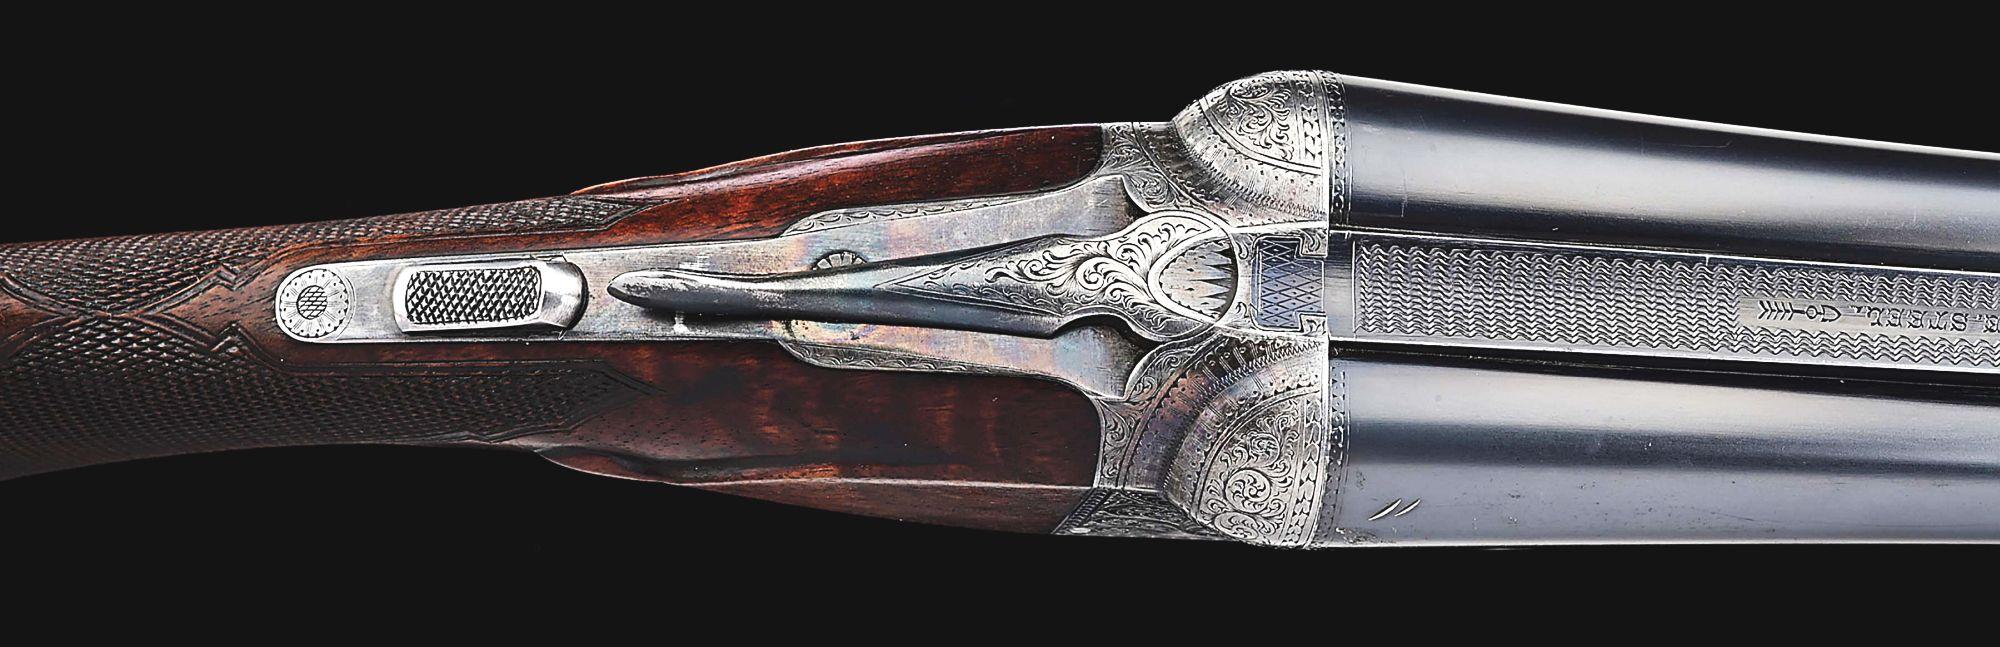 (C) PARKER BROTHERS CHE SIDE BY SIDE 16 BORE SHOTGUN OF L.L. BEAN.